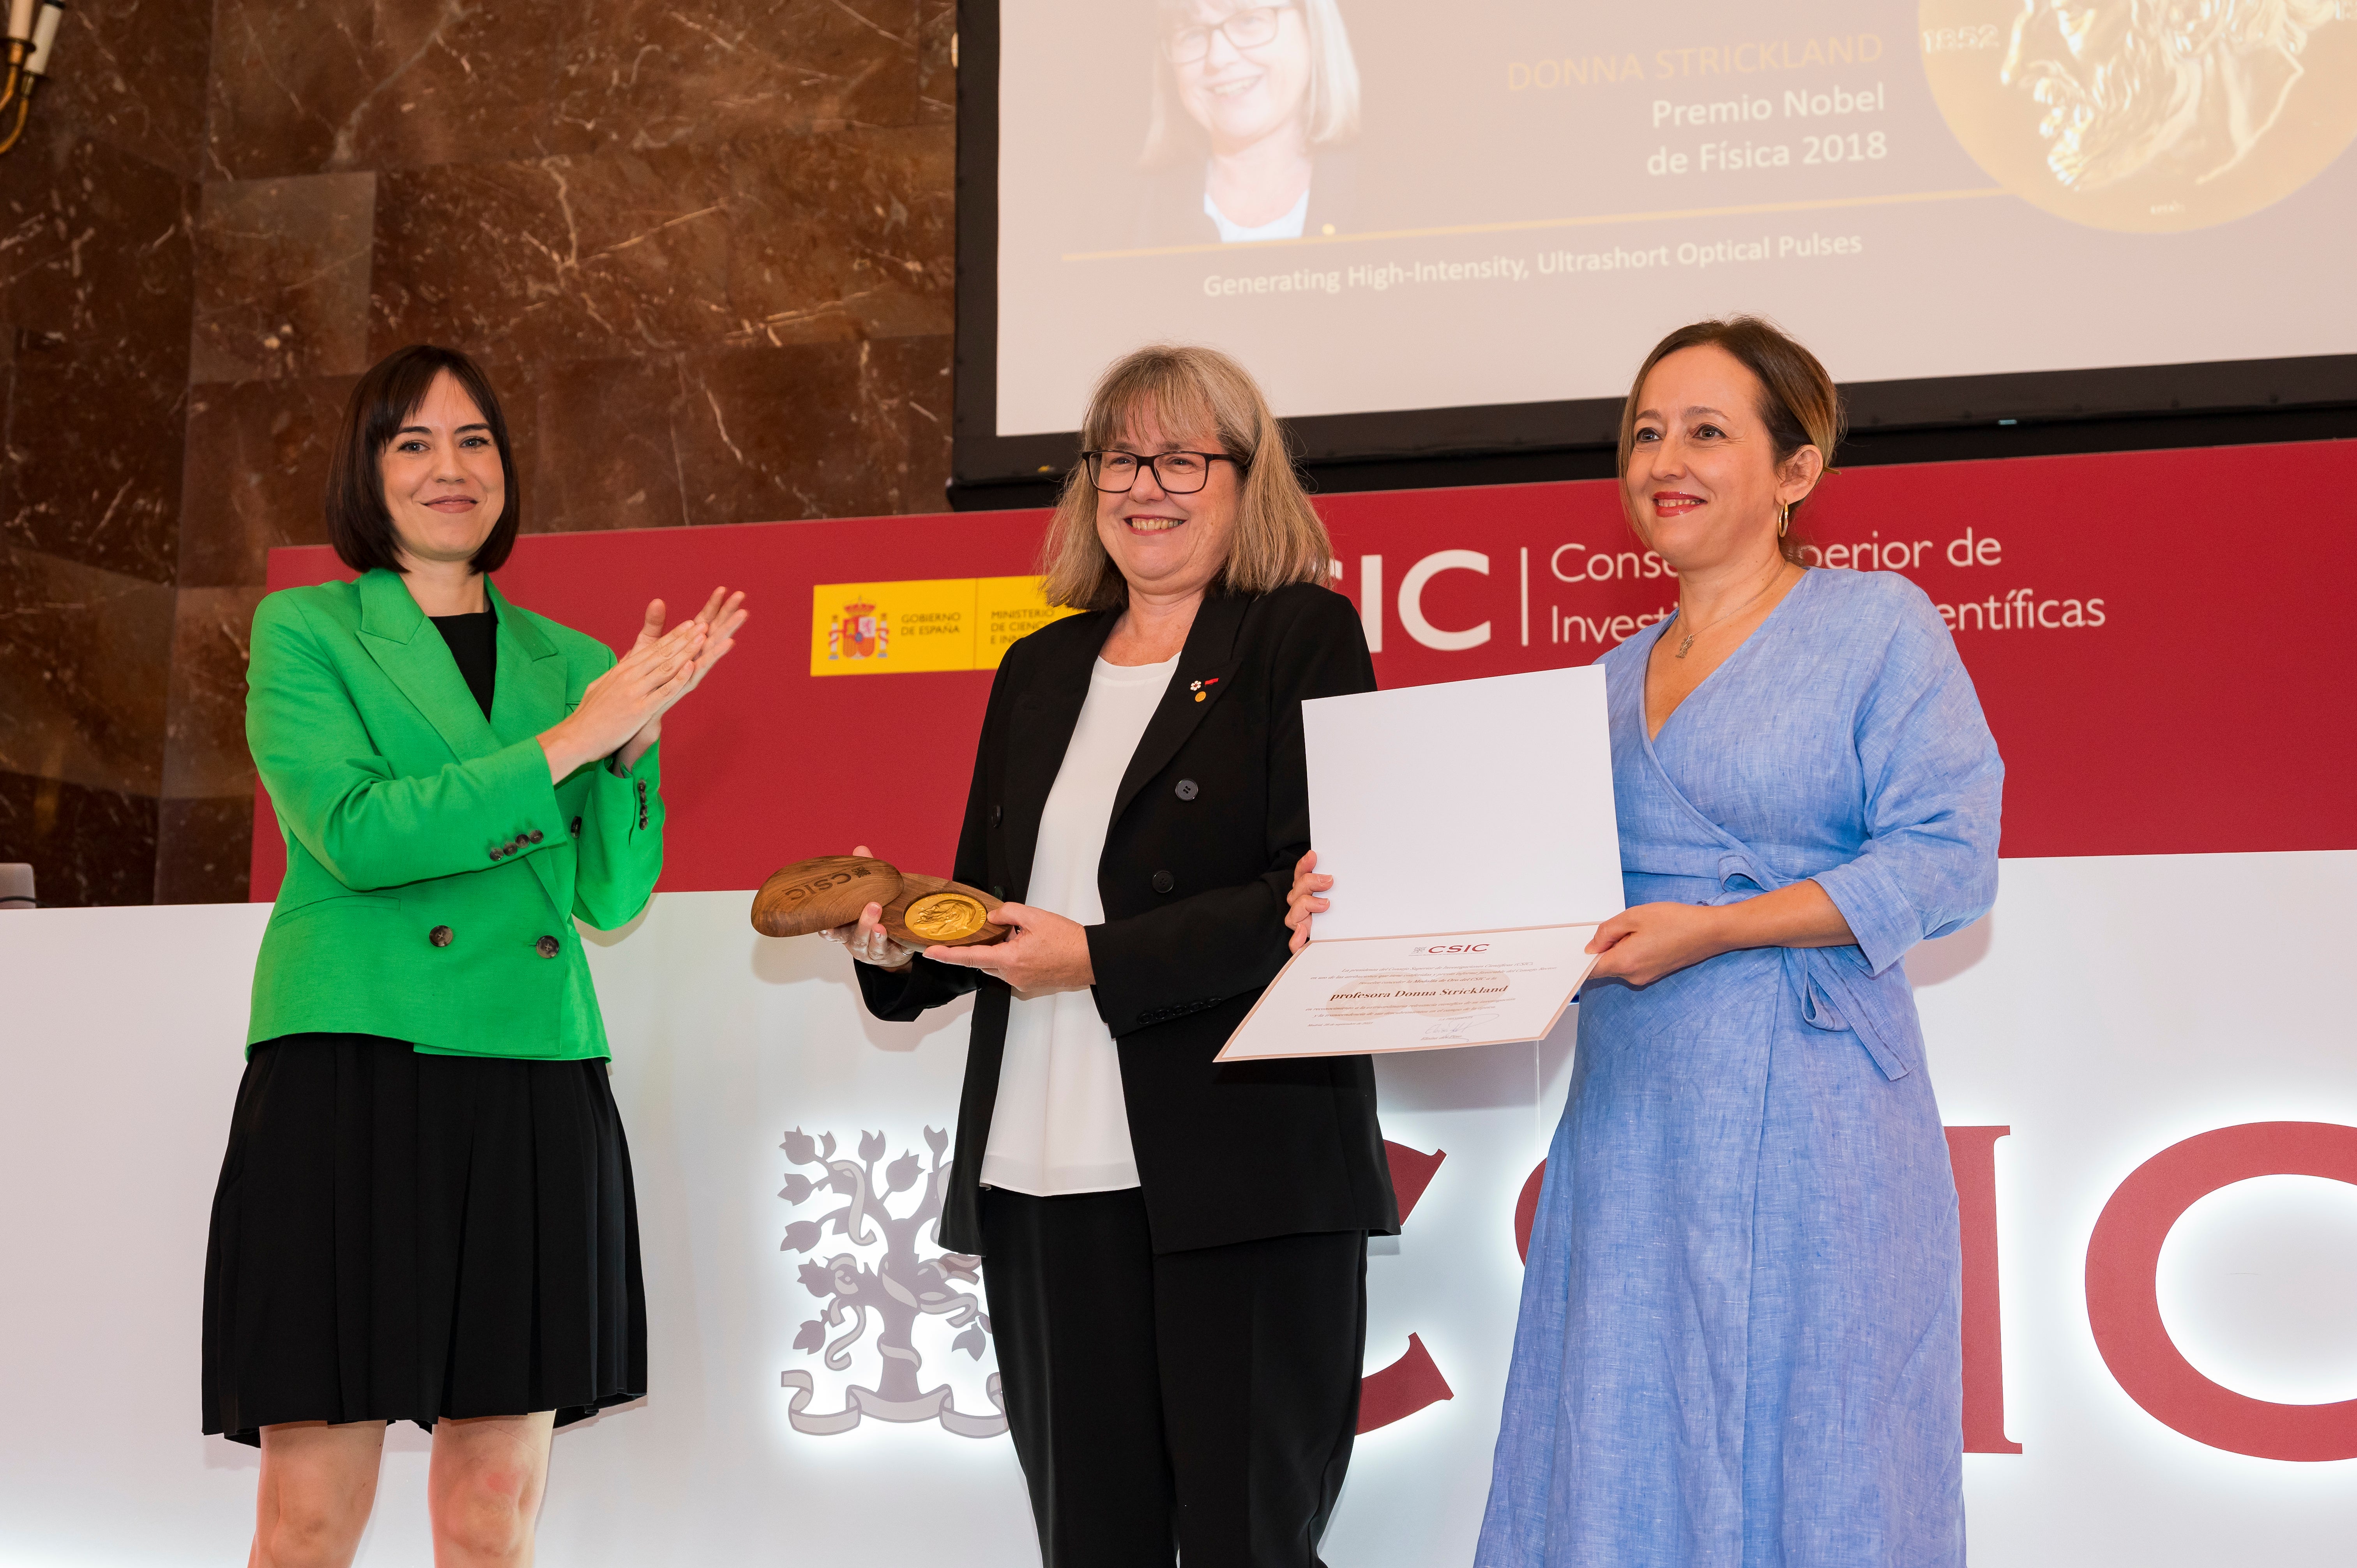 Image of Noble Prize Winner, Donna Strickland, receiving  Gold Medal from the acting minister of science and innovation, Diana Morant, and the president of the CSIC, Eloisa del Pino.